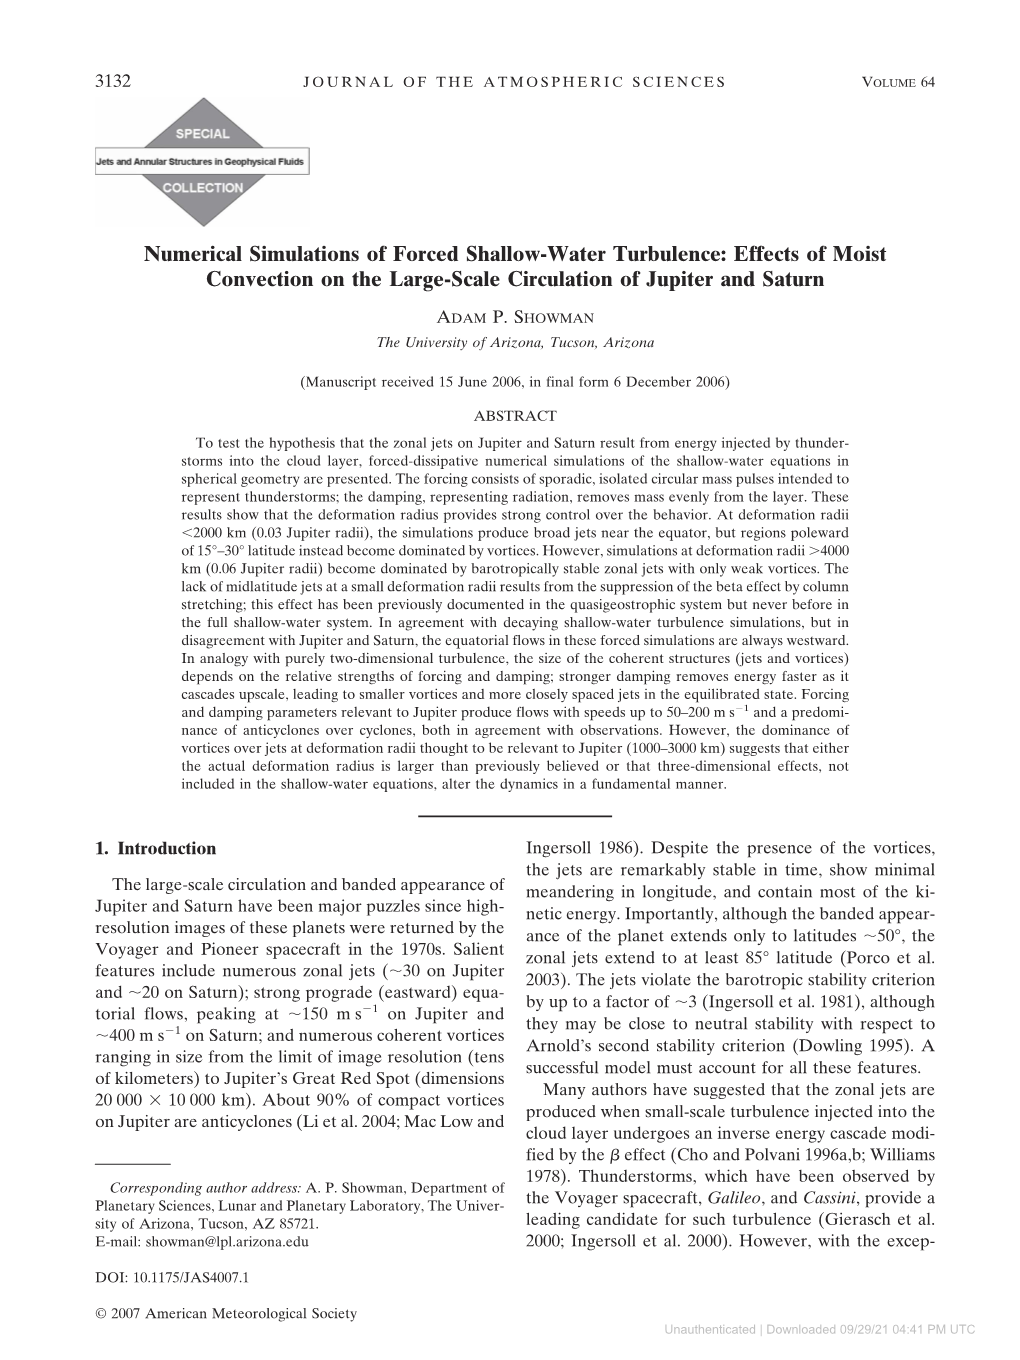 Numerical Simulations of Forced Shallow-Water Turbulence: Effects of Moist Convection on the Large-Scale Circulation of Jupiter and Saturn